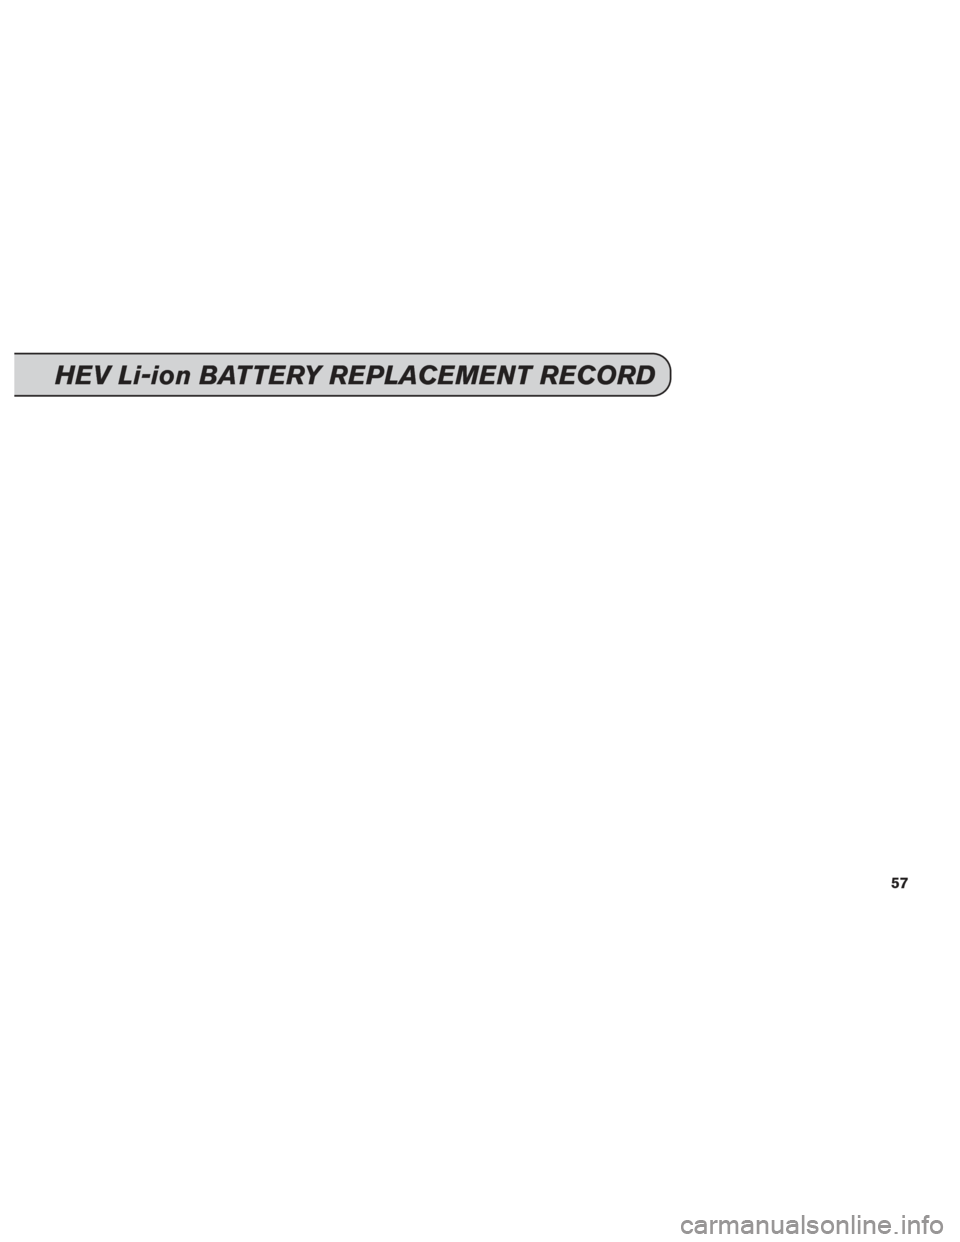 NISSAN SENTRA 2014 B17 / 7.G Service And Maintenance Guide HEV Li-ion BATTERY REPLACEMENT RECORD
57 